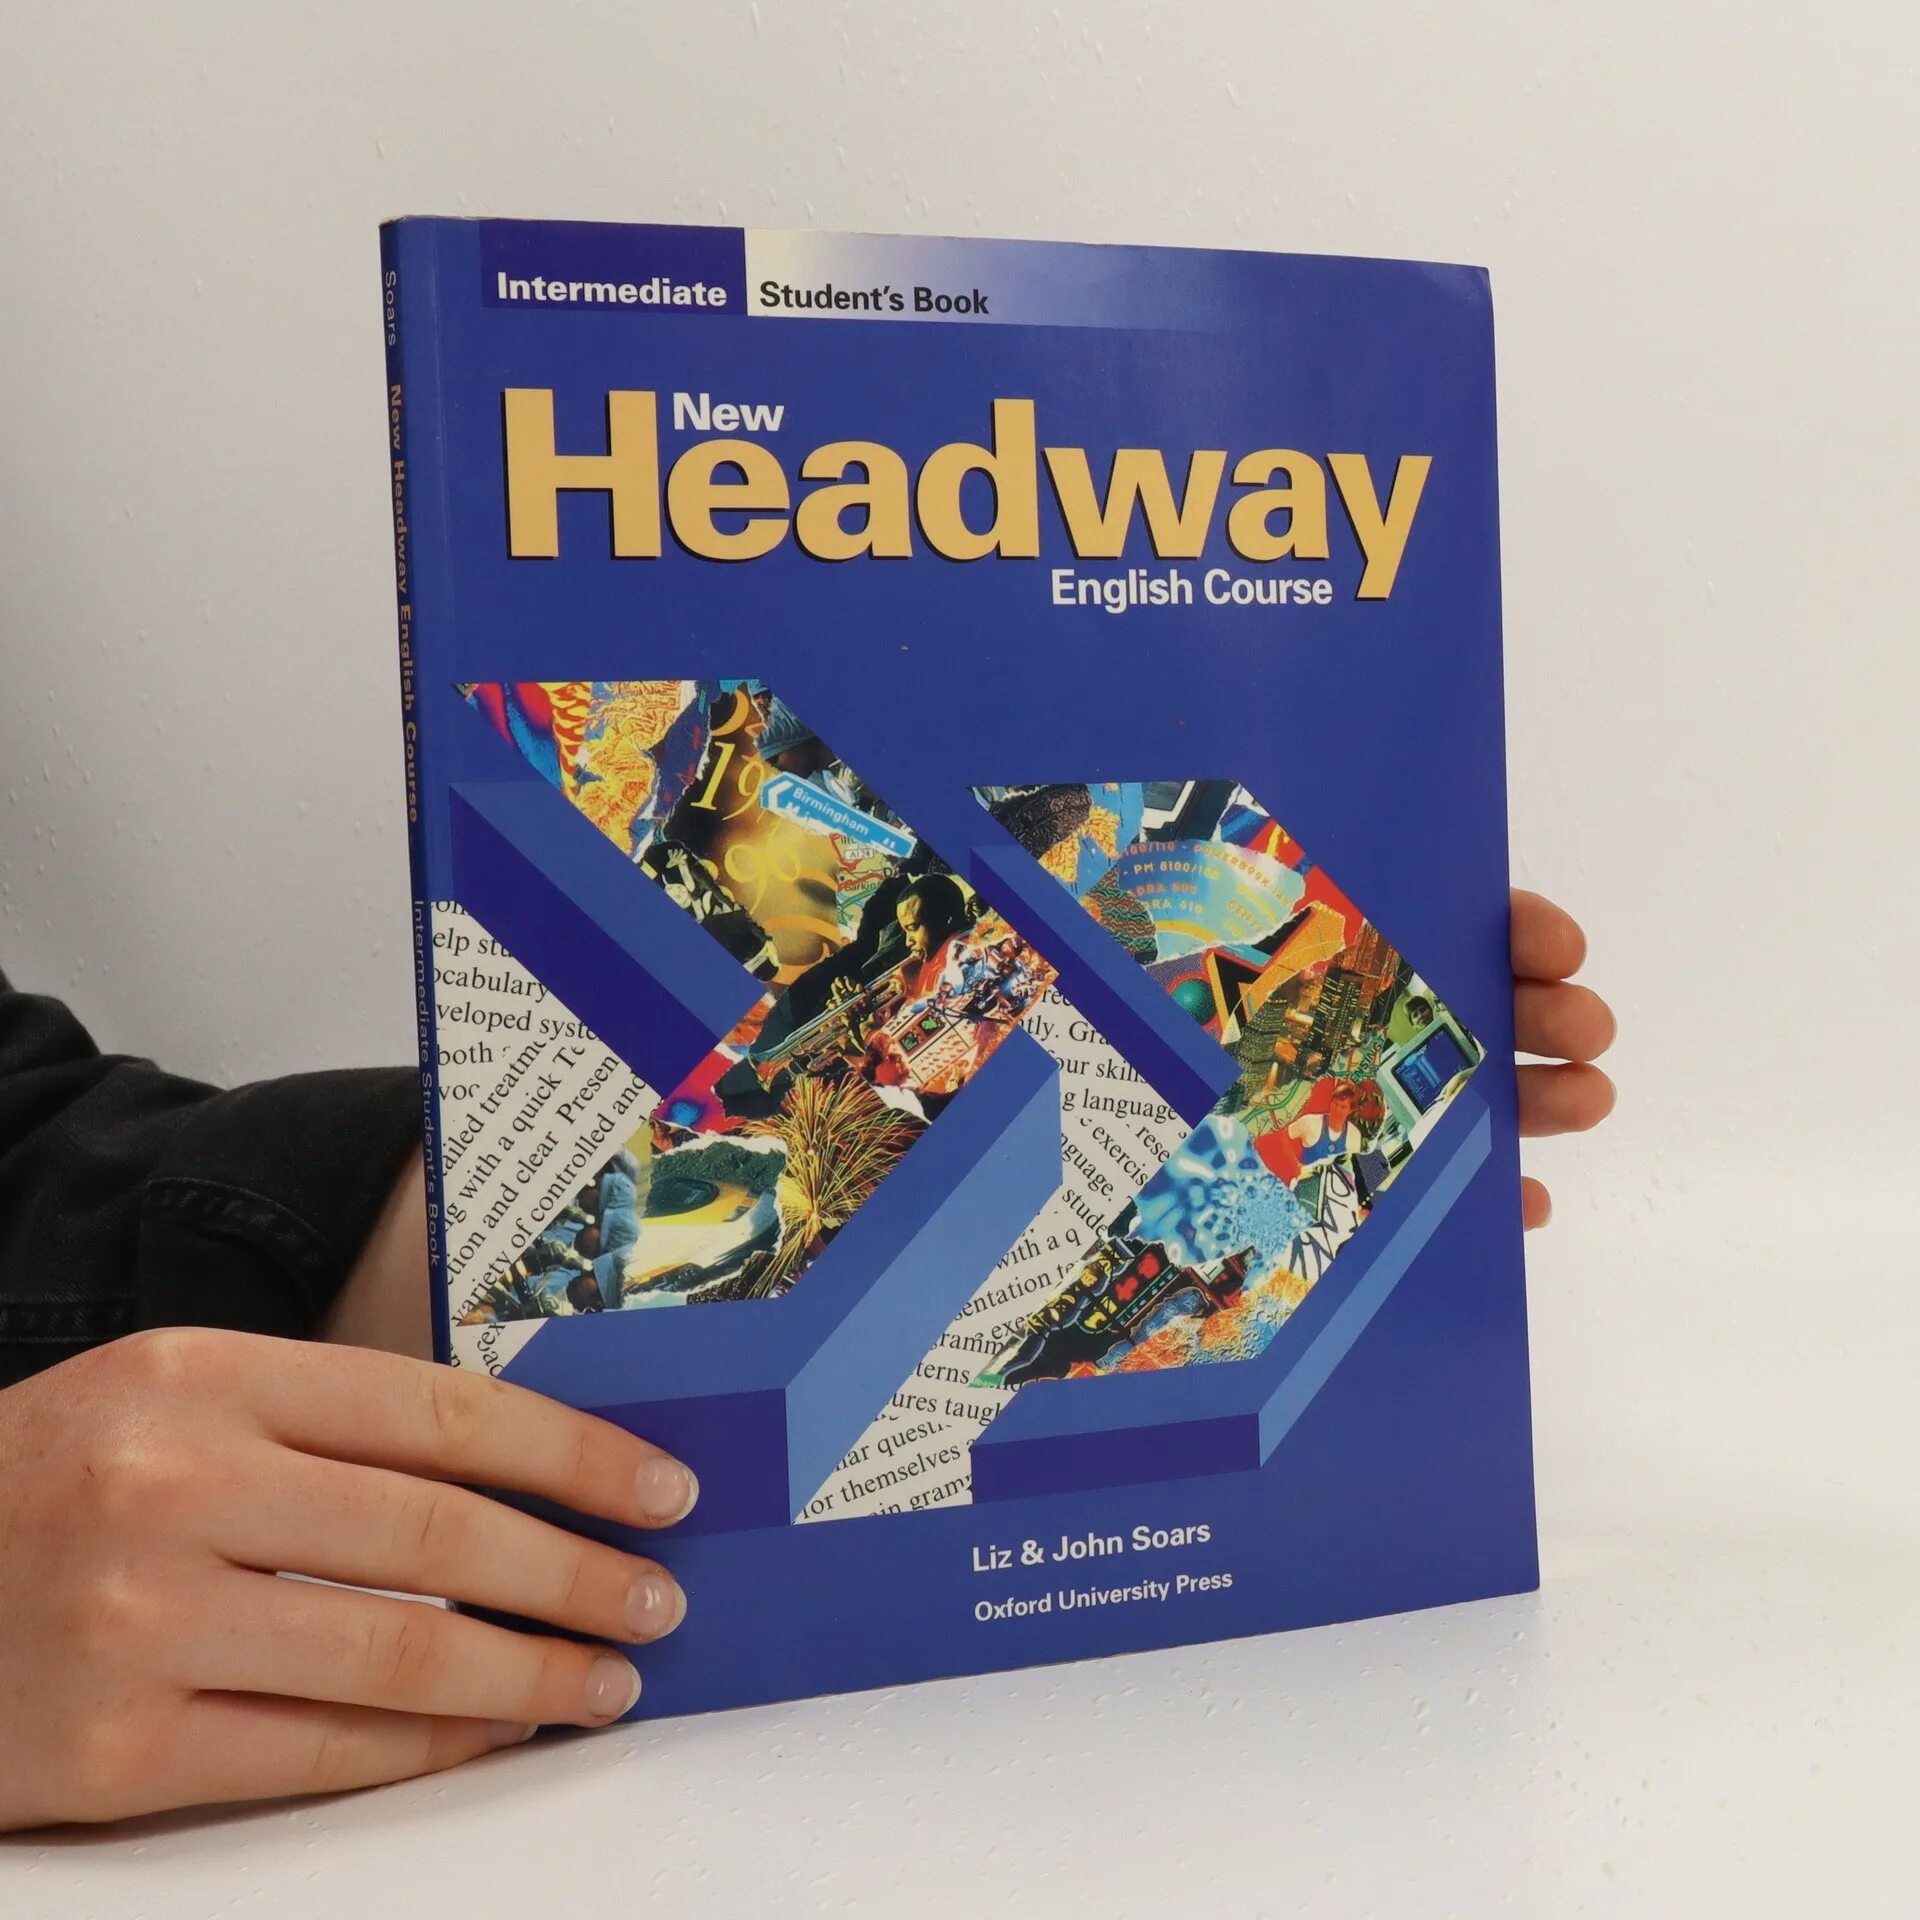 Headway intermediate student s book. Учебник Oxford Headway. New Headway учебники. Headway Elementary student's book. New Headway English course student's book.